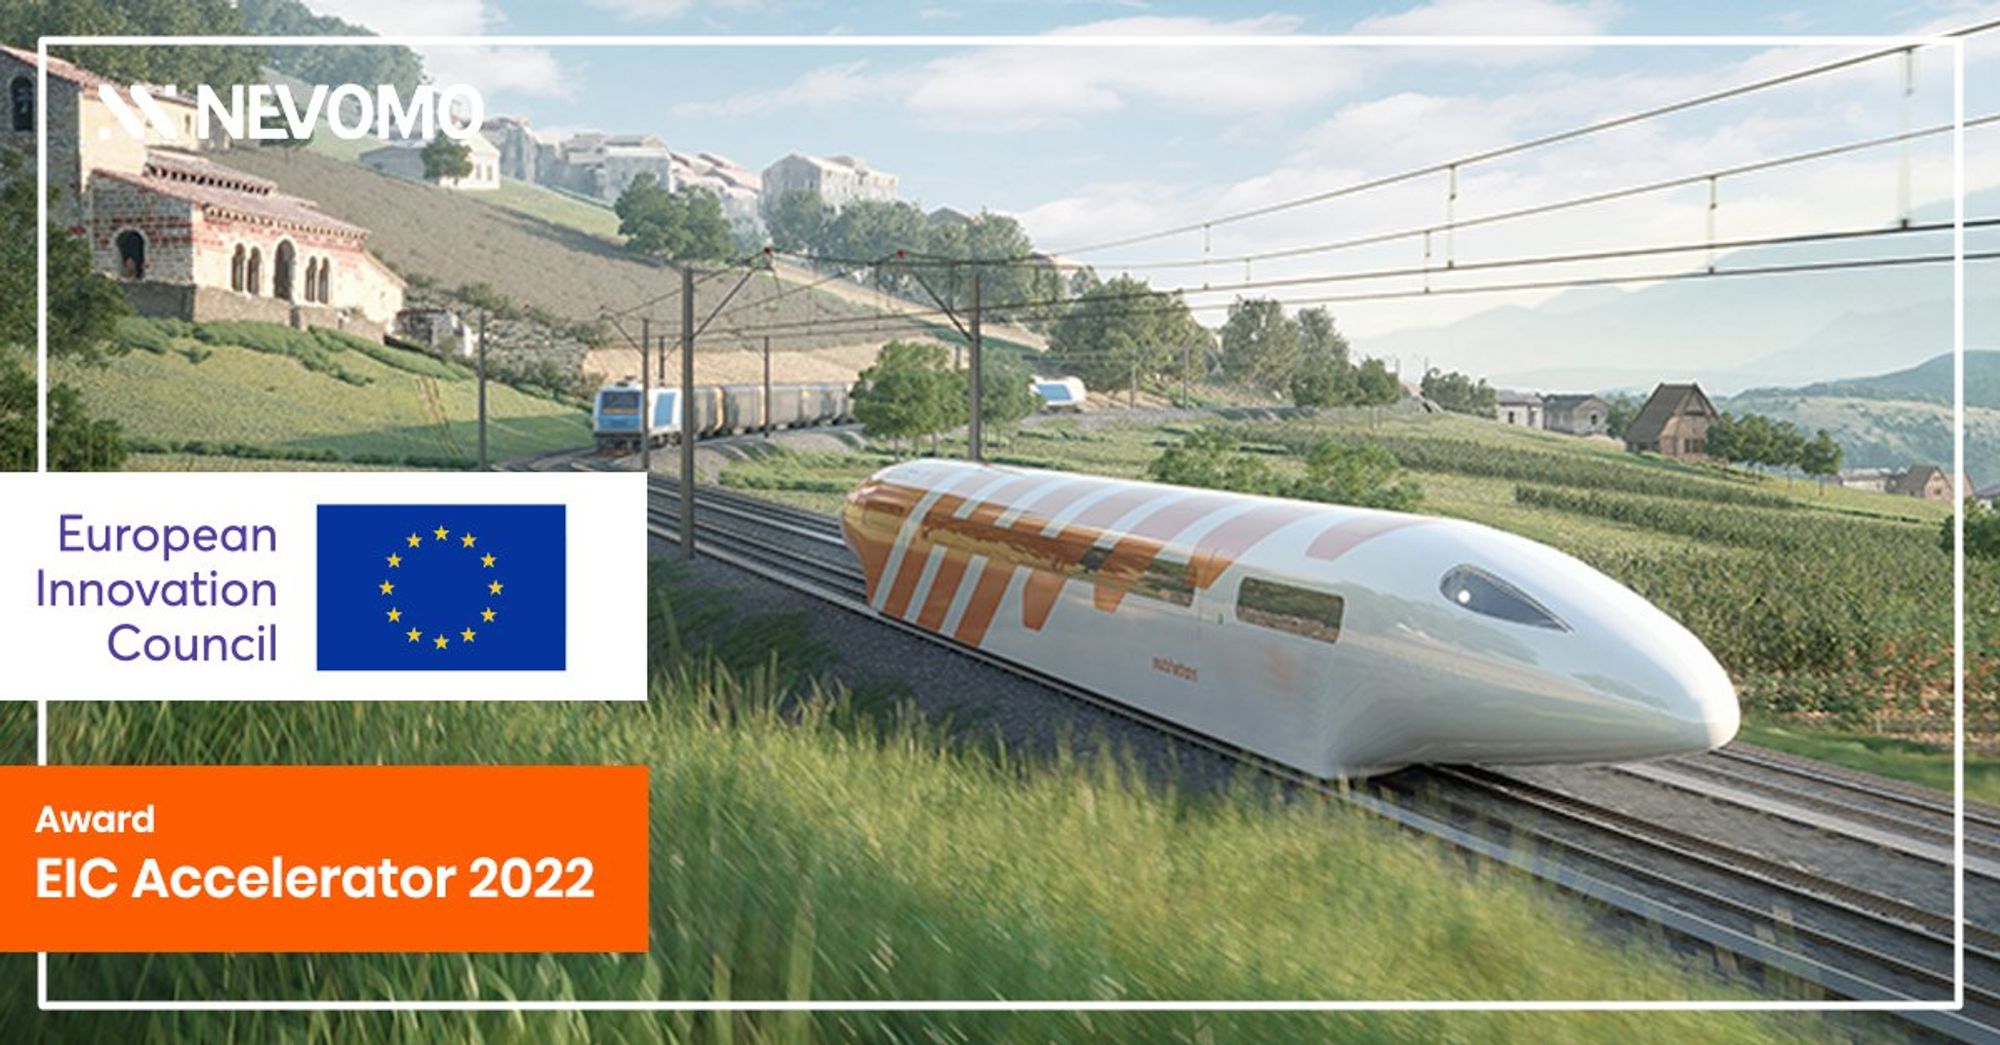 EU gives millions to start-up developing 550km/h maglev rail - Global Construction Review